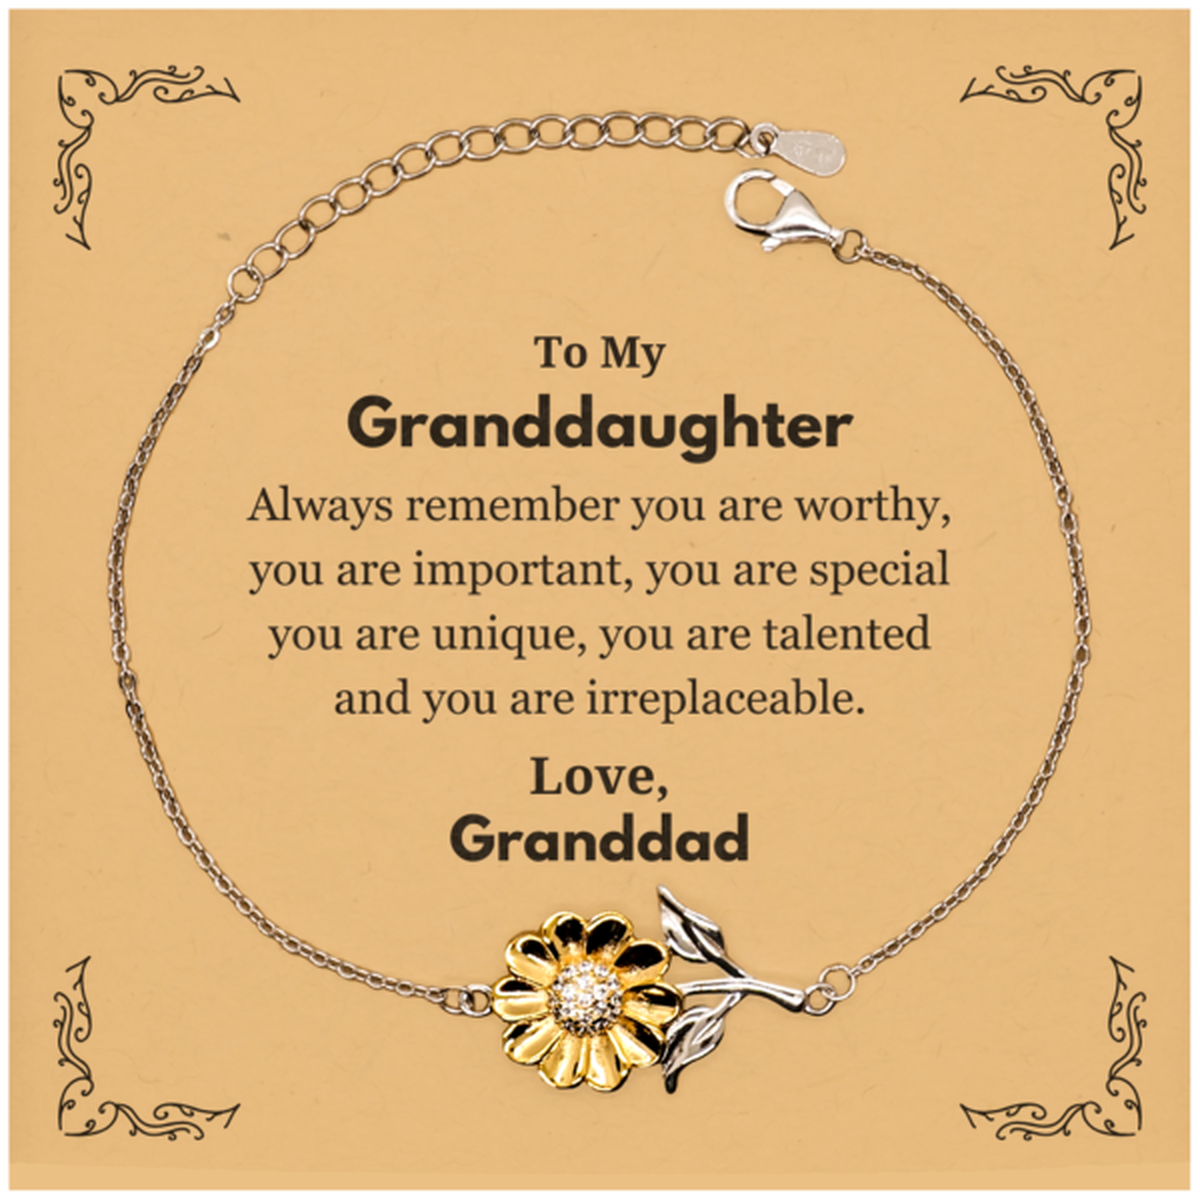 Granddaughter Birthday Gifts from Granddad, Inspirational Sunflower Bracelet for Granddaughter Christmas Graduation Gifts for Granddaughter Always remember you are worthy, you are important. Love, Granddad